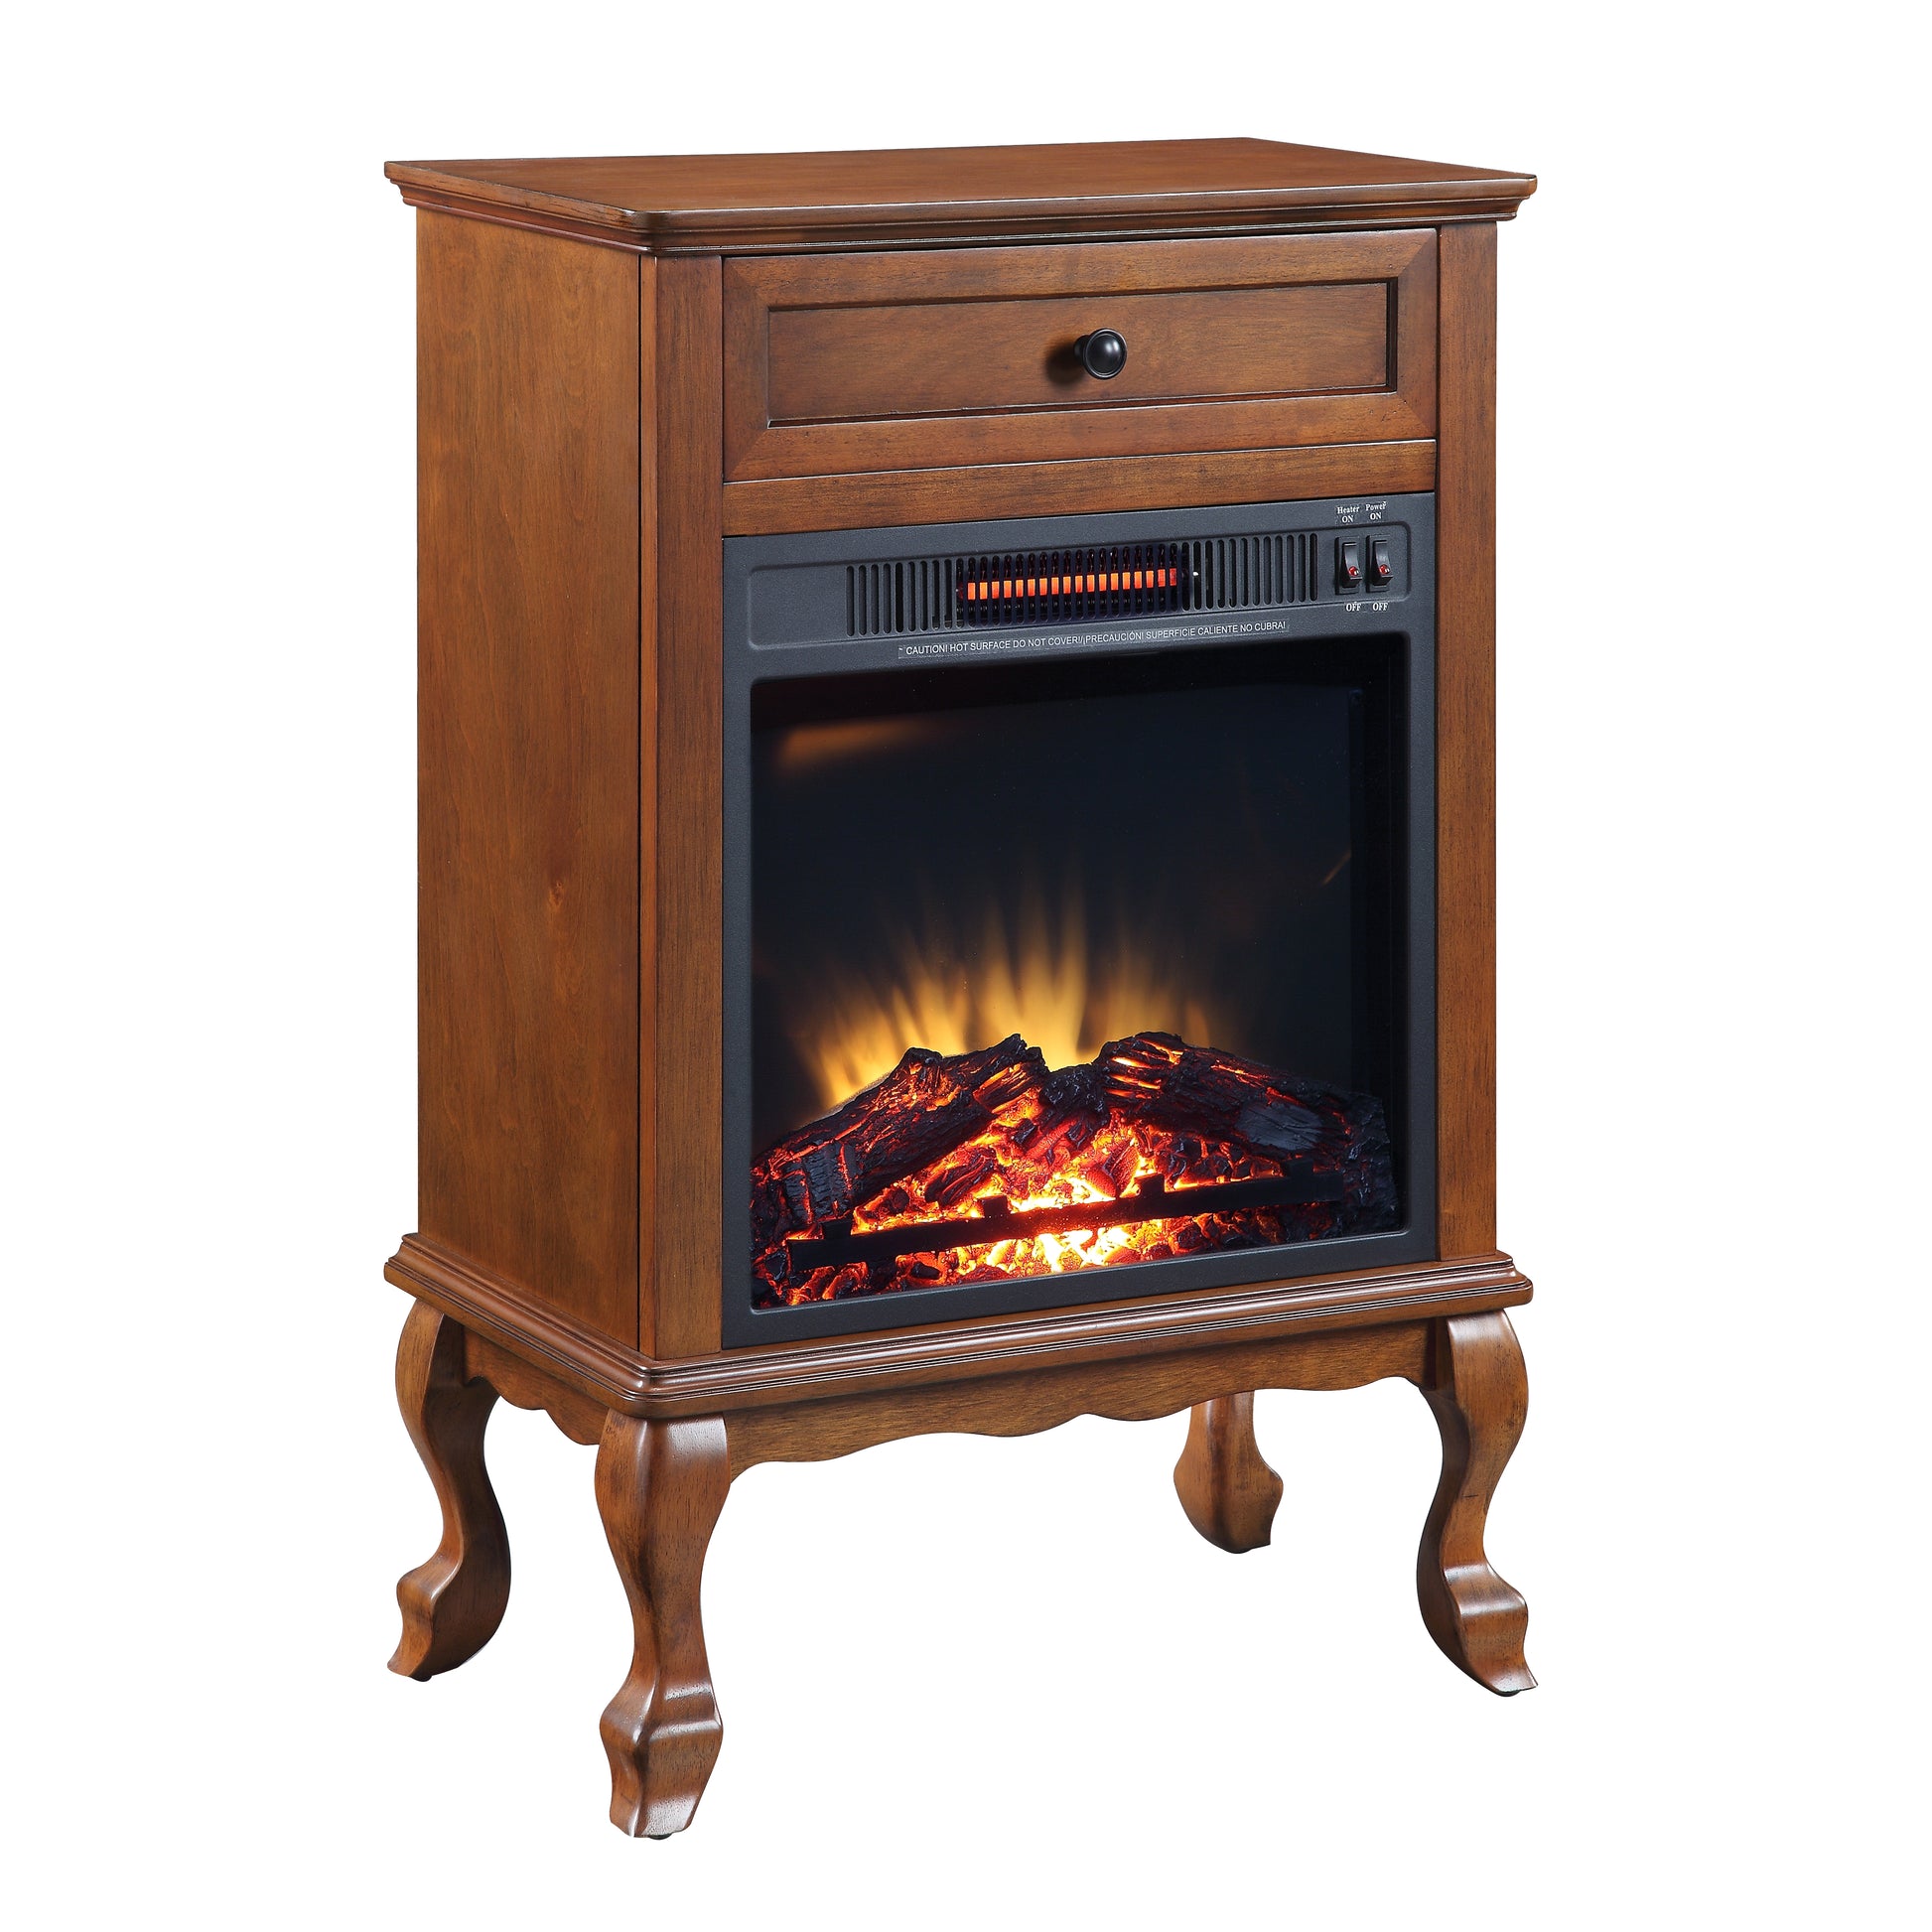 Electric Fireplace Heater/ Fireplace Stove with Realistic LED Flames and Logs